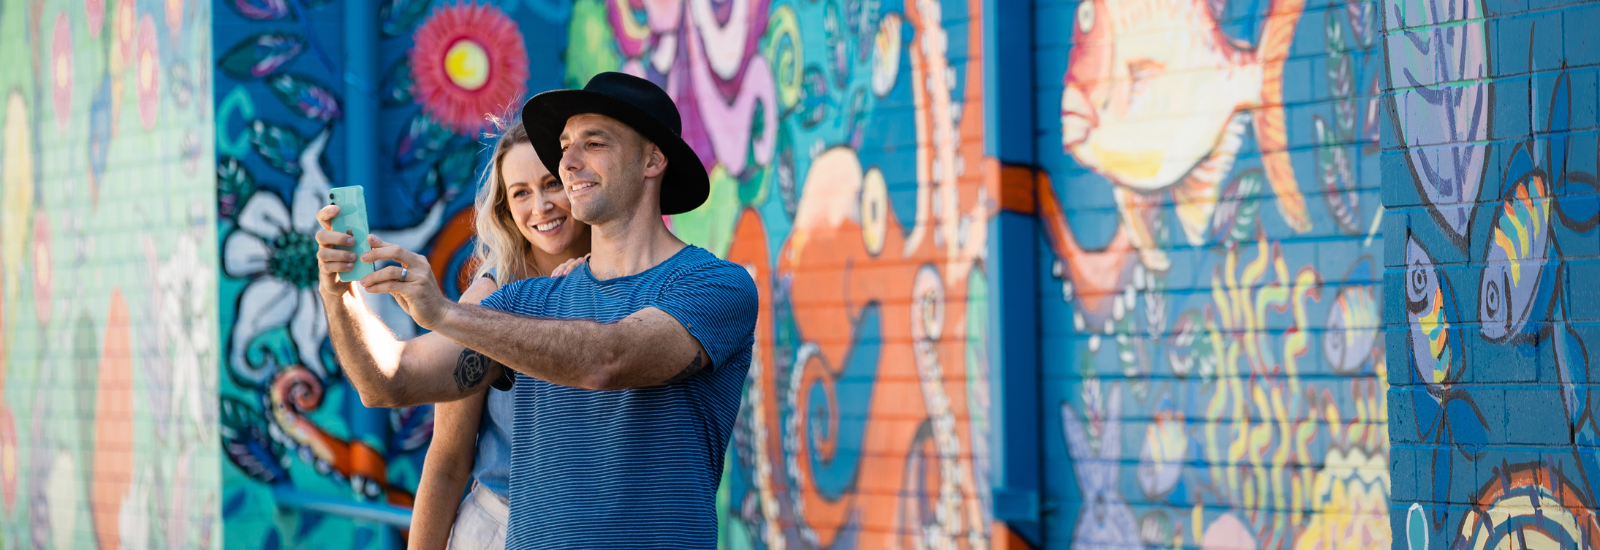 Couple taking selfie in front of street wall art banner image